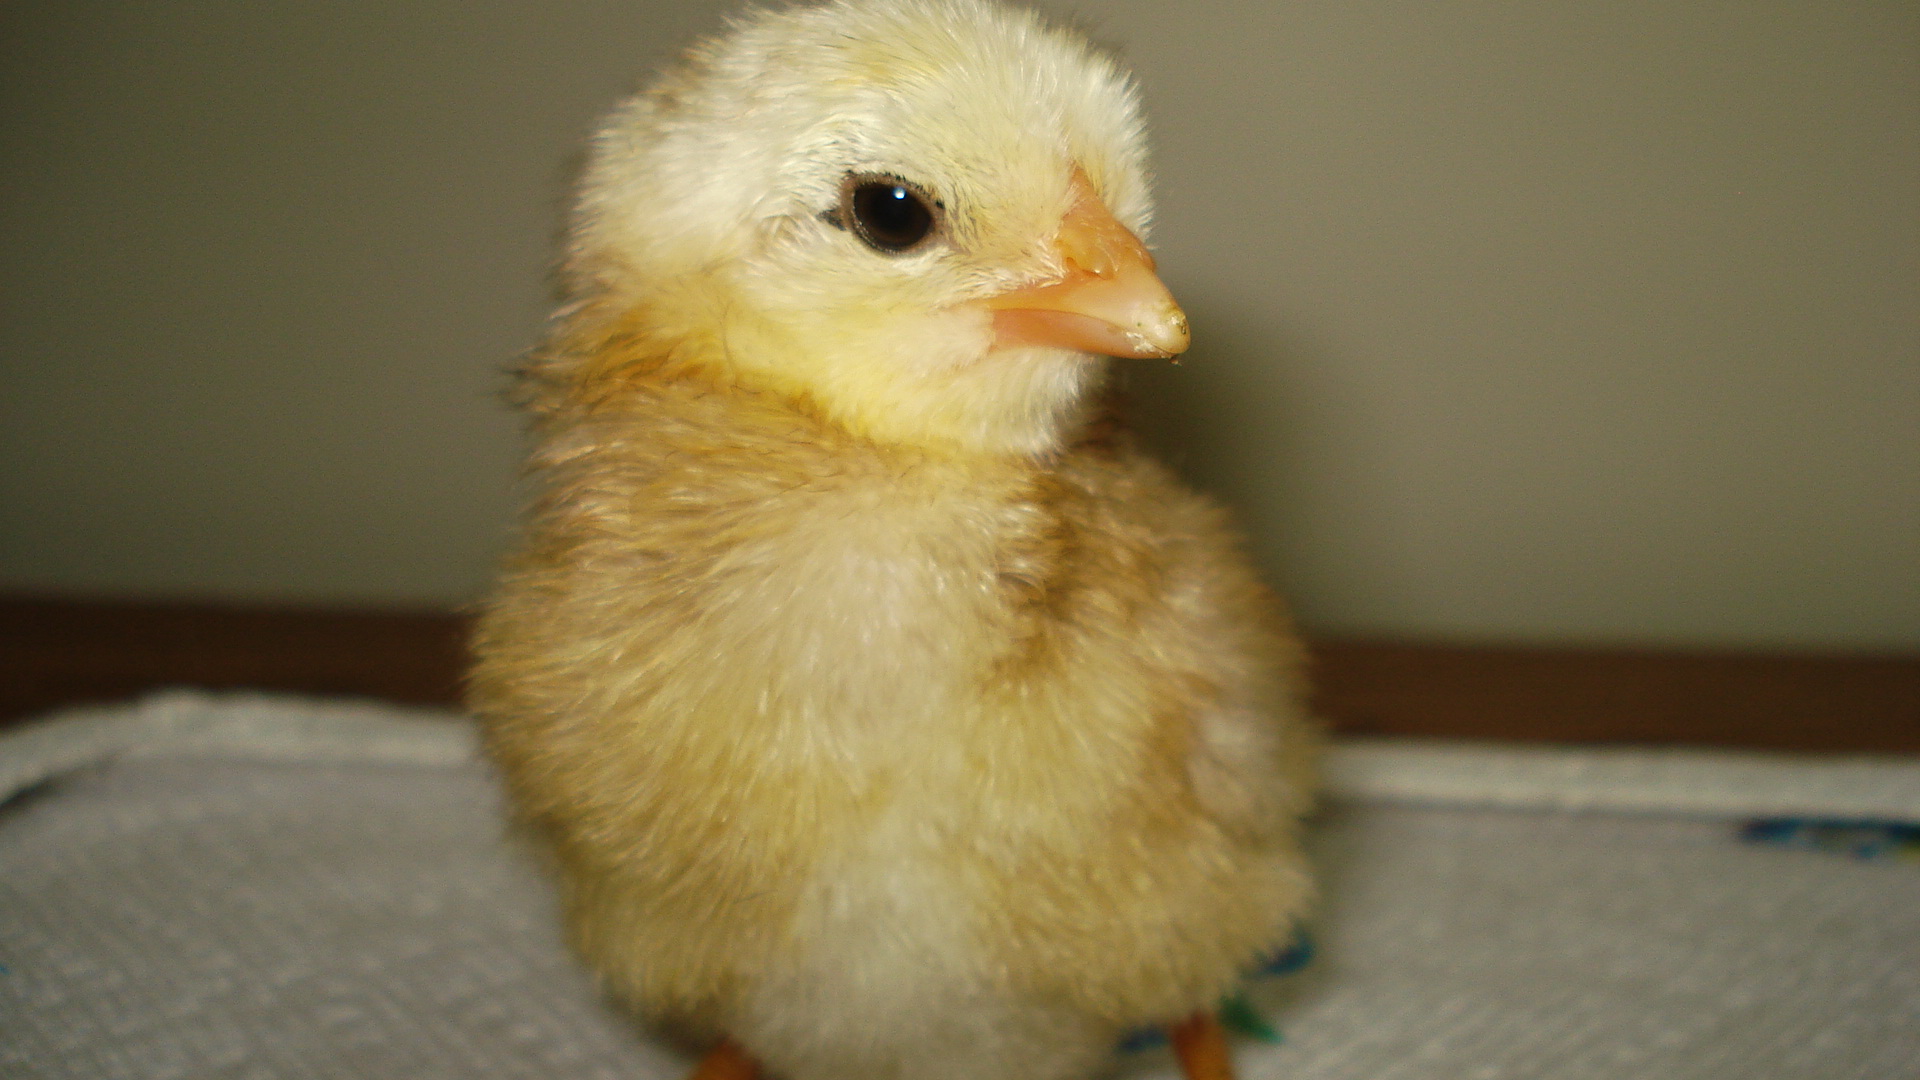 Chick hatched on 6/12/12, cleanfaced